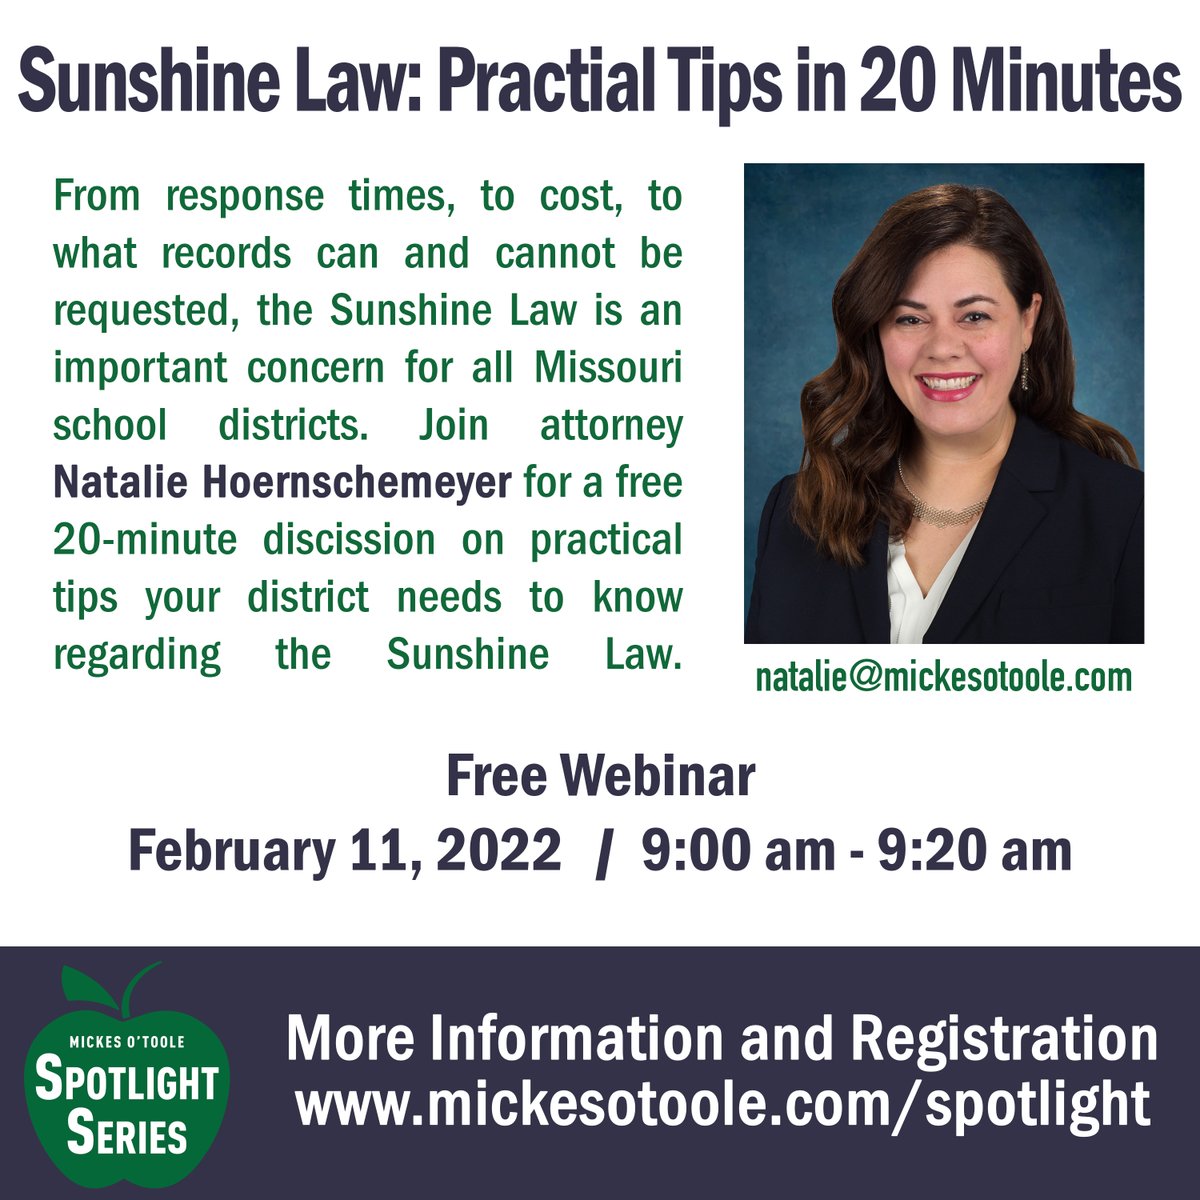 There is still time to register! Join attorney Natalie Hoernschemeyer this Friday, February 11 for a #Free 20-minute discussion on practical tips your district needs to know regarding the #SunshineLaw.

Register here: mickesotoole.com/spotlight

#EducationLaw #MissouriSchools